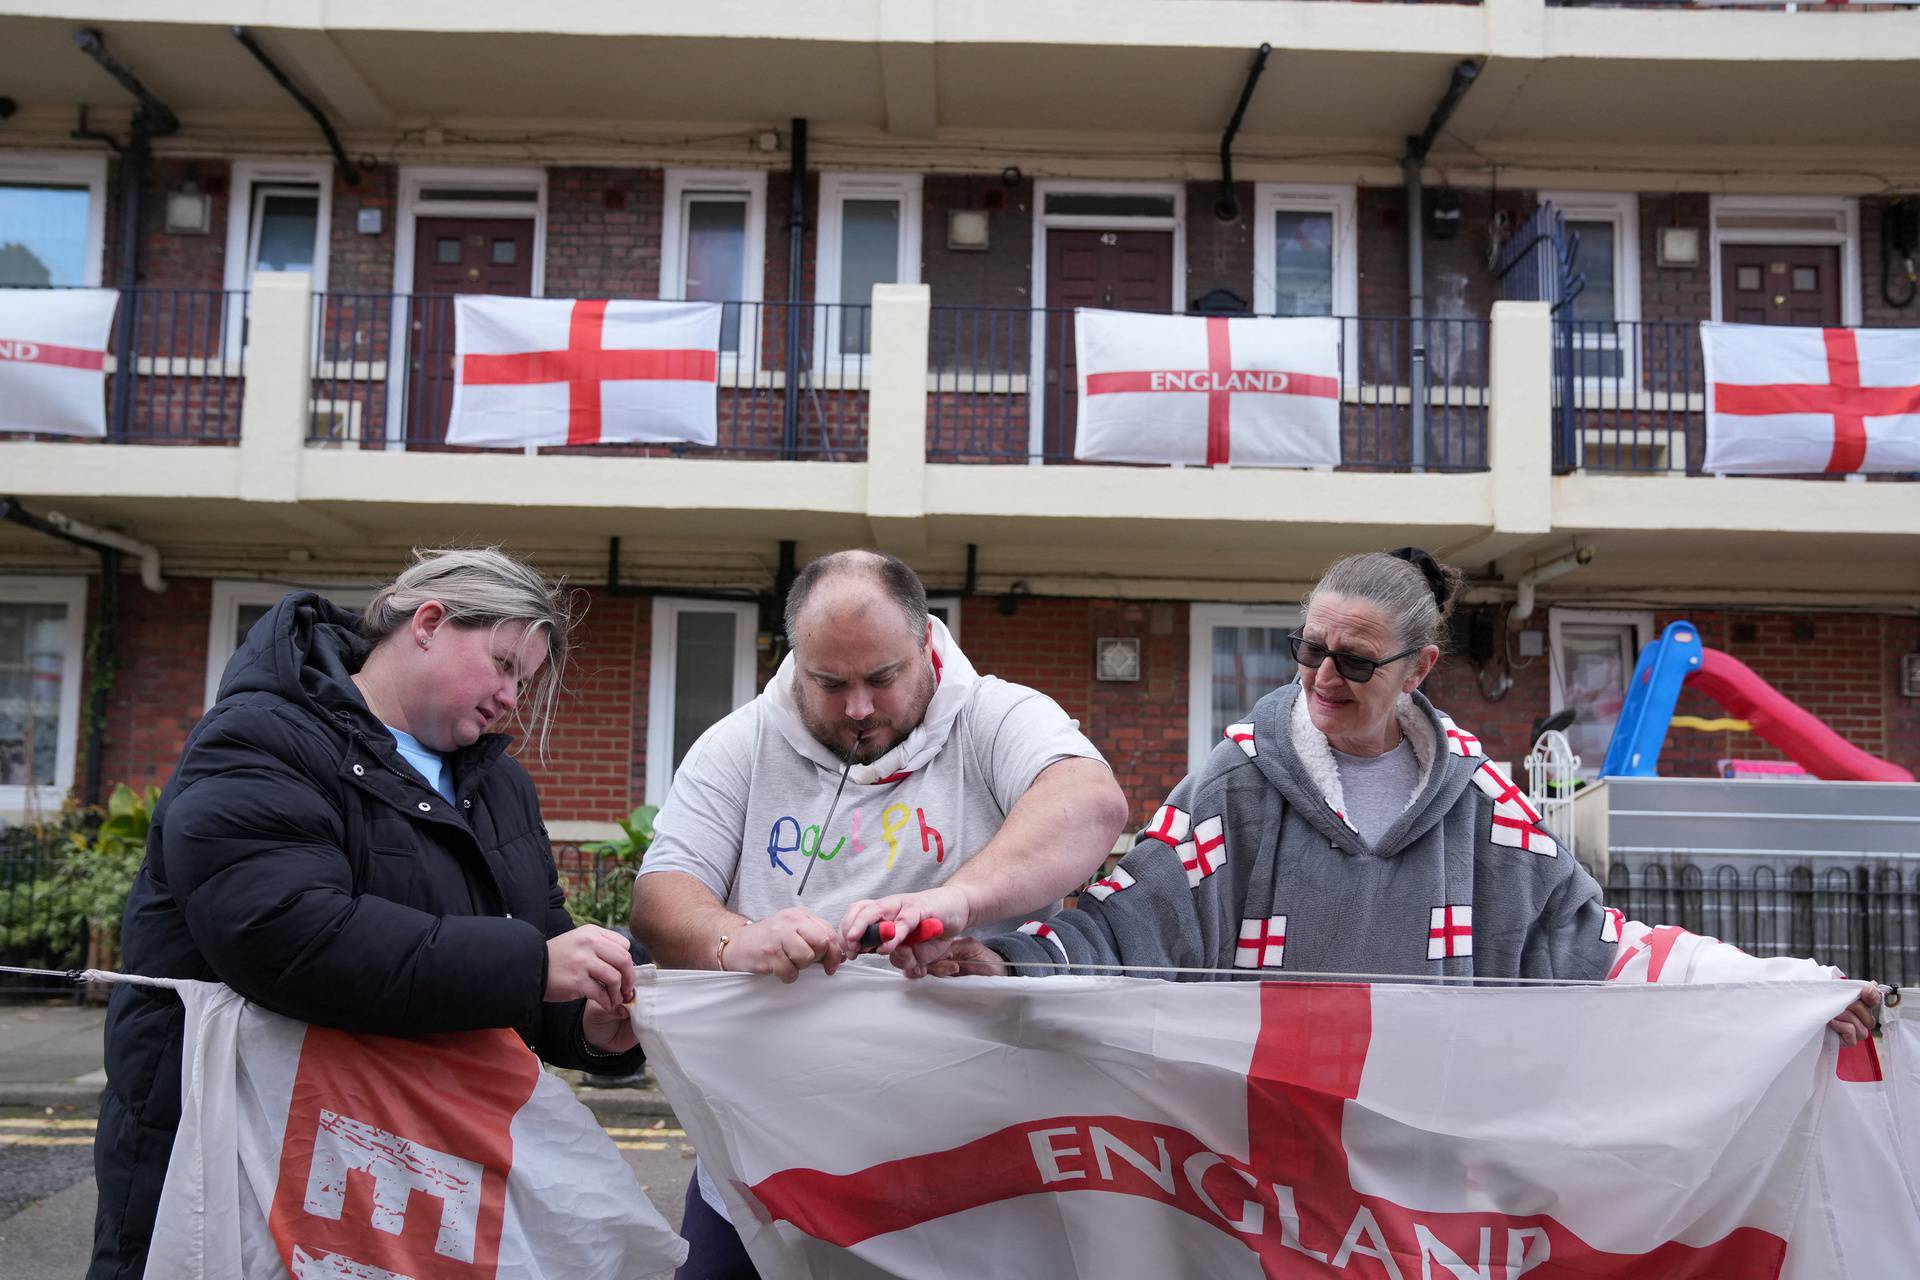 The Kirby estate is being decorated with England Flags ahead World Cup 2022